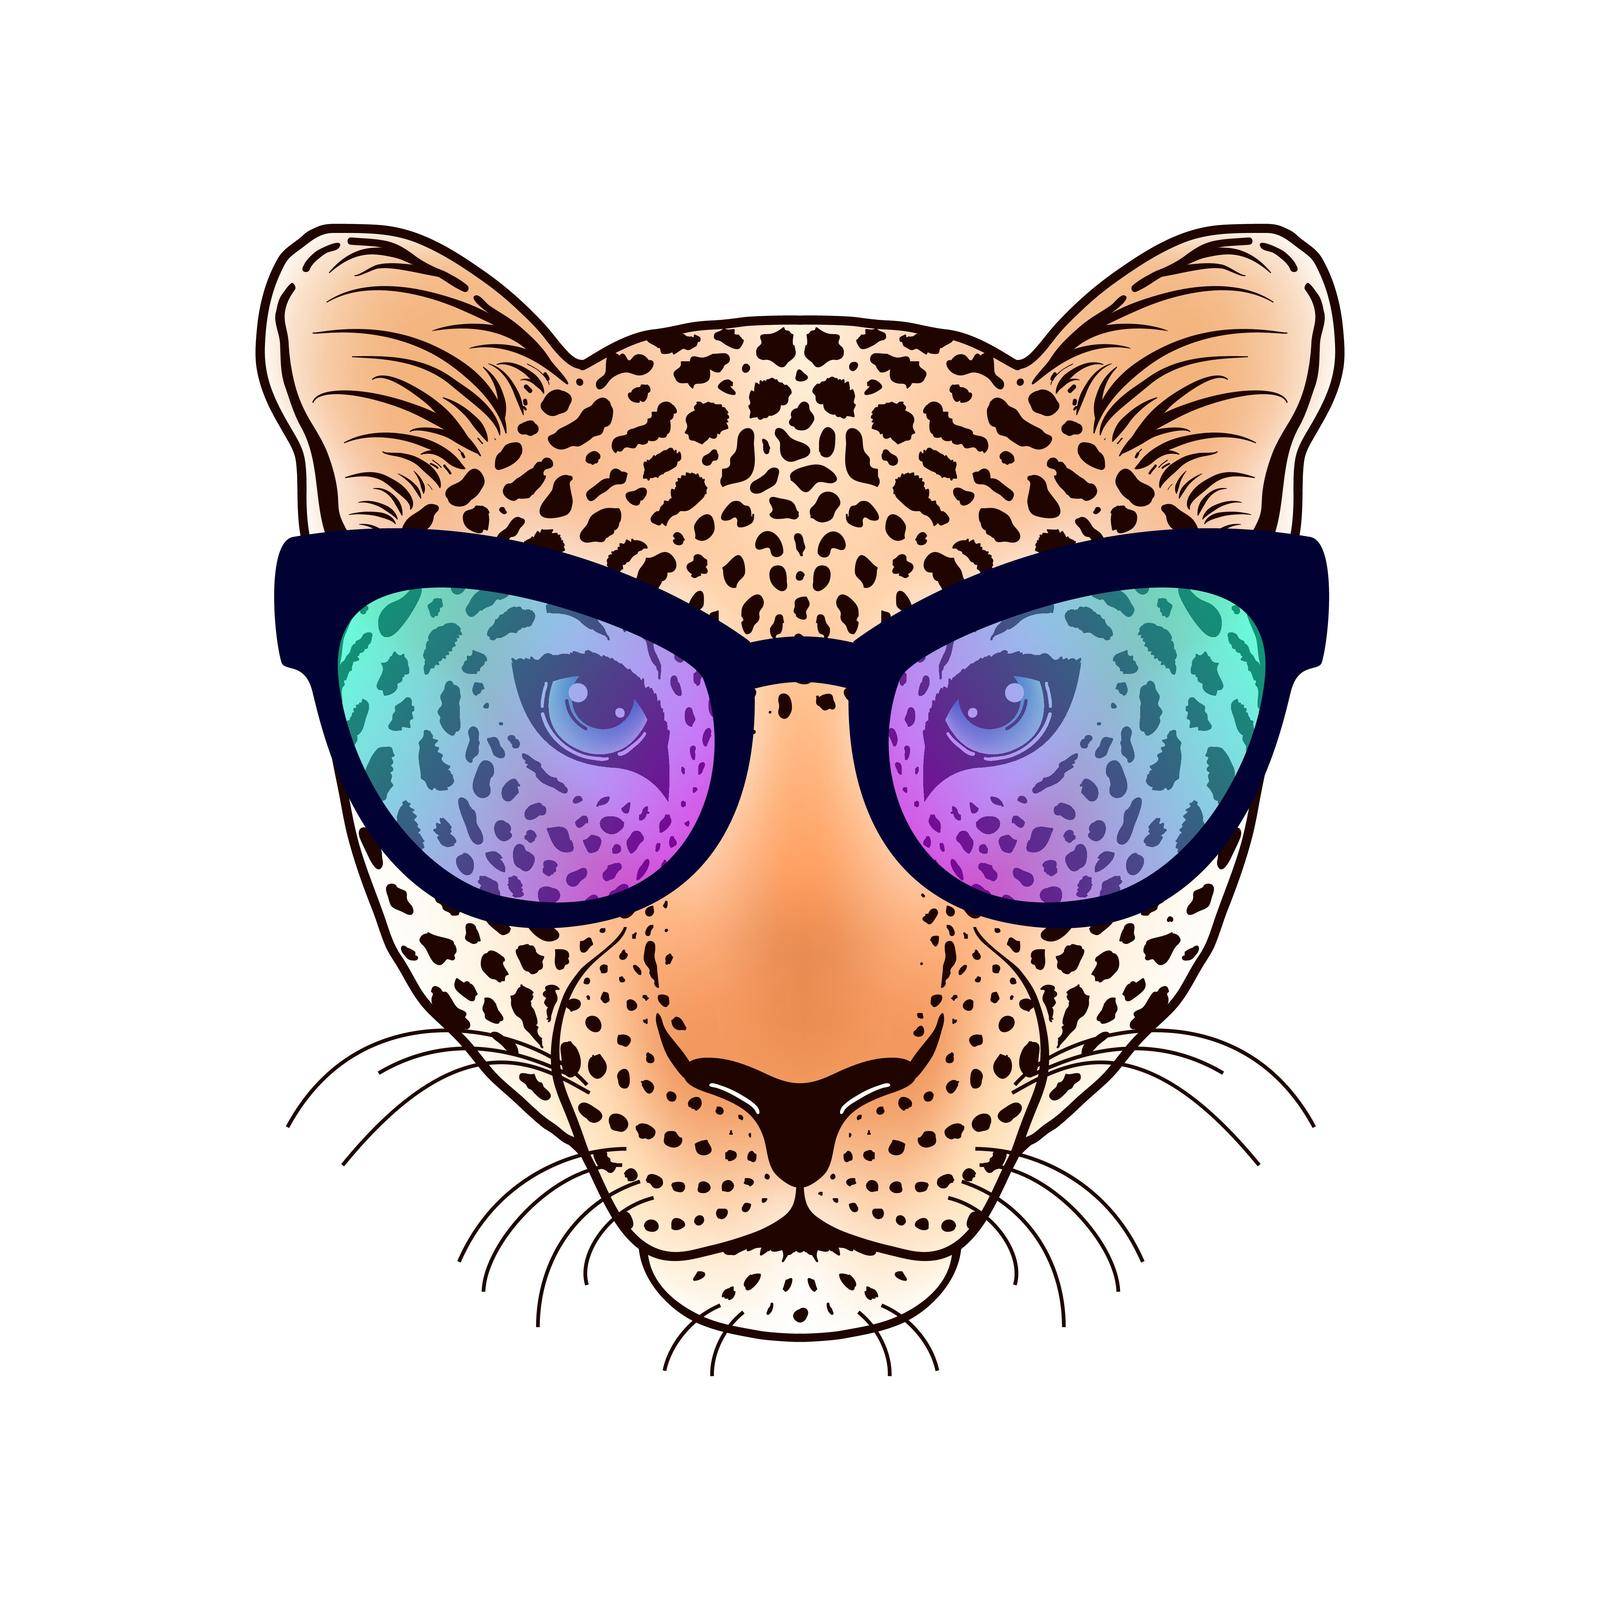 Leopard muzzle with sunglasses on white background. Idea for t-shirts design.